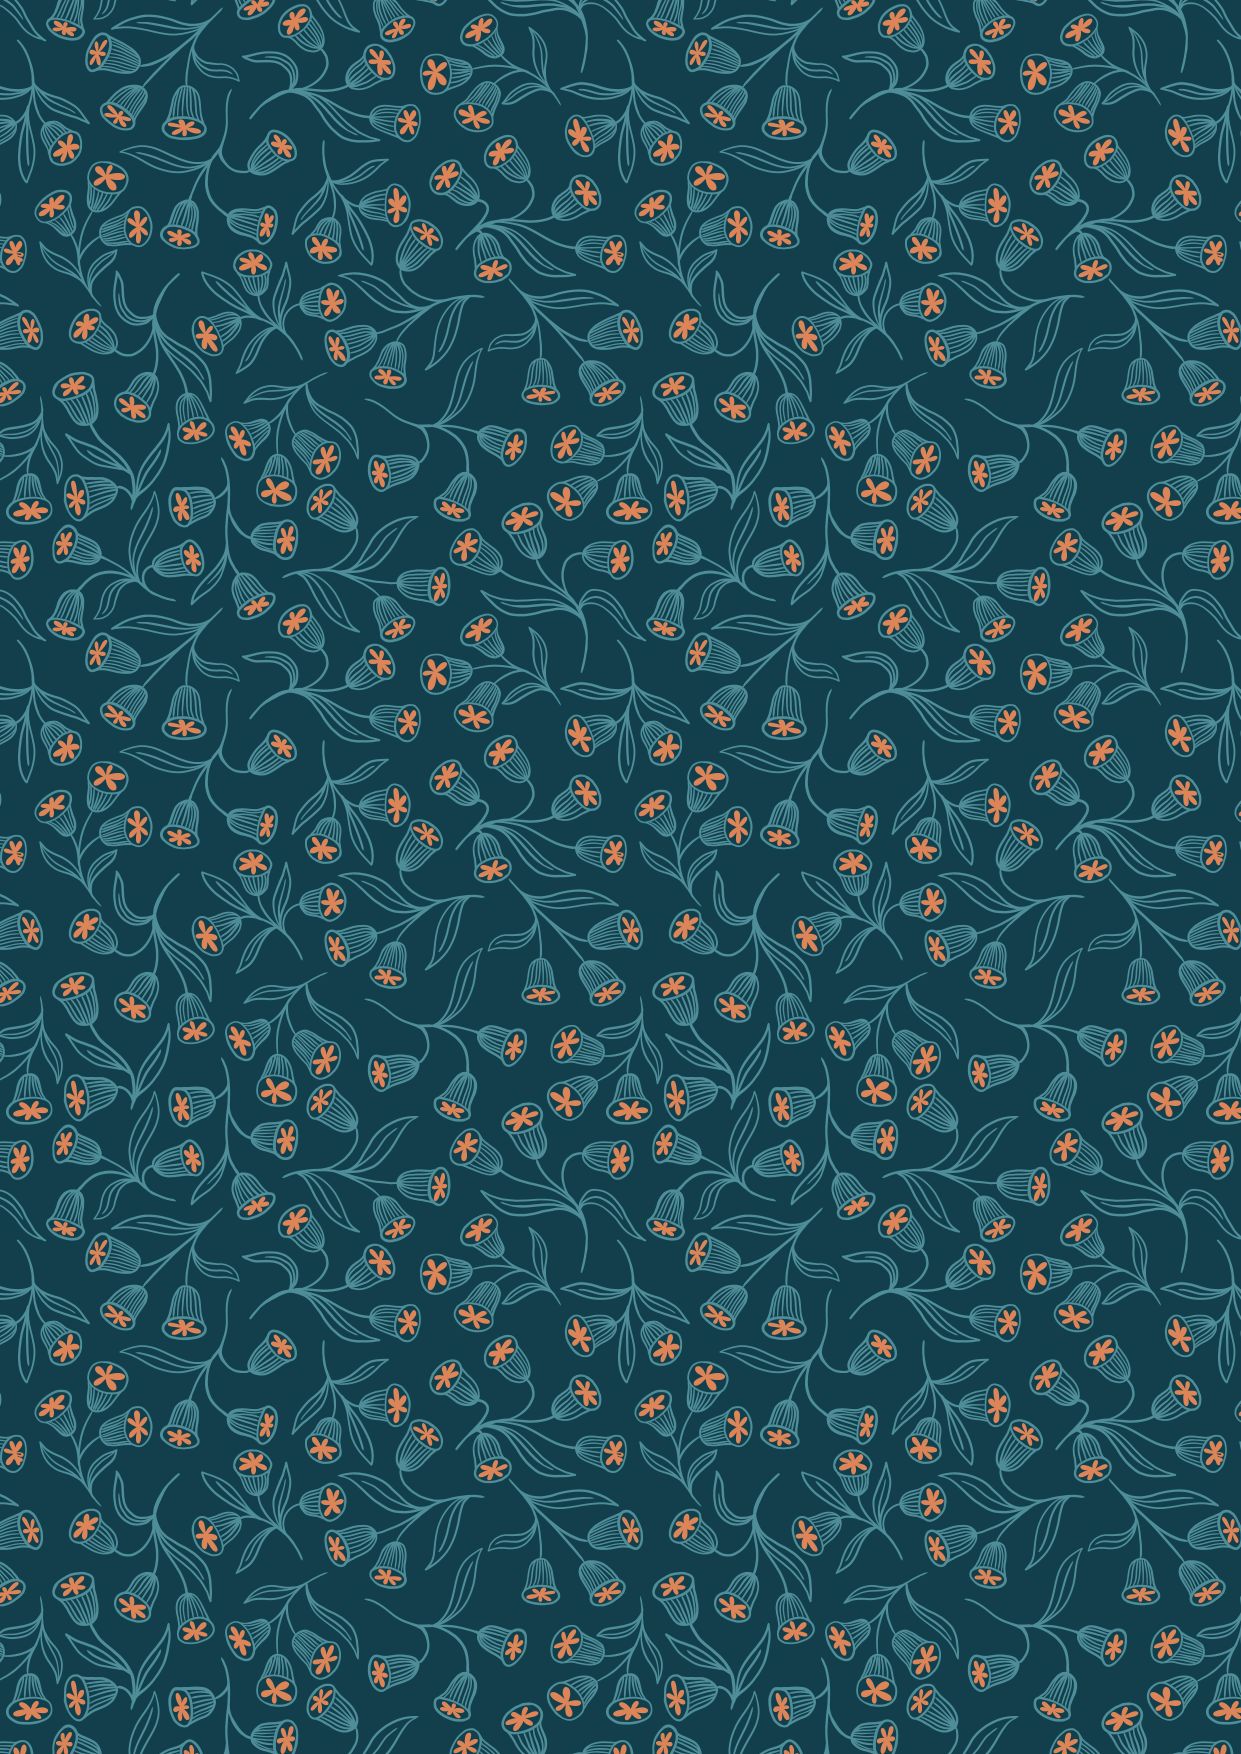 Enchanted Flowers on Teal